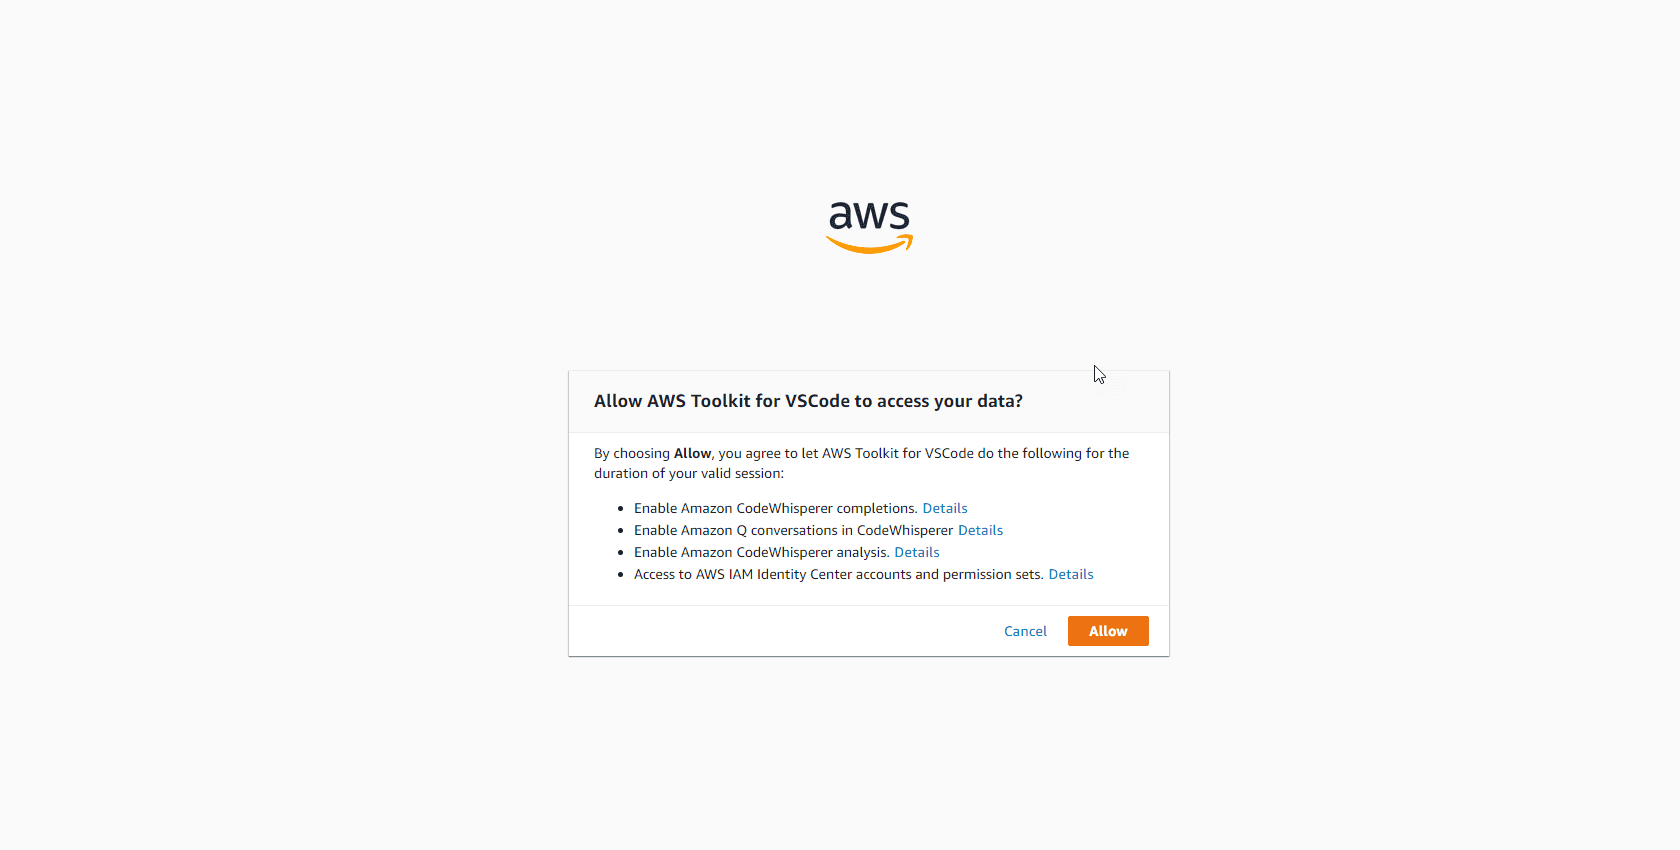 AWS Toolkit - Amazon Q, CodeWhisperer, and more